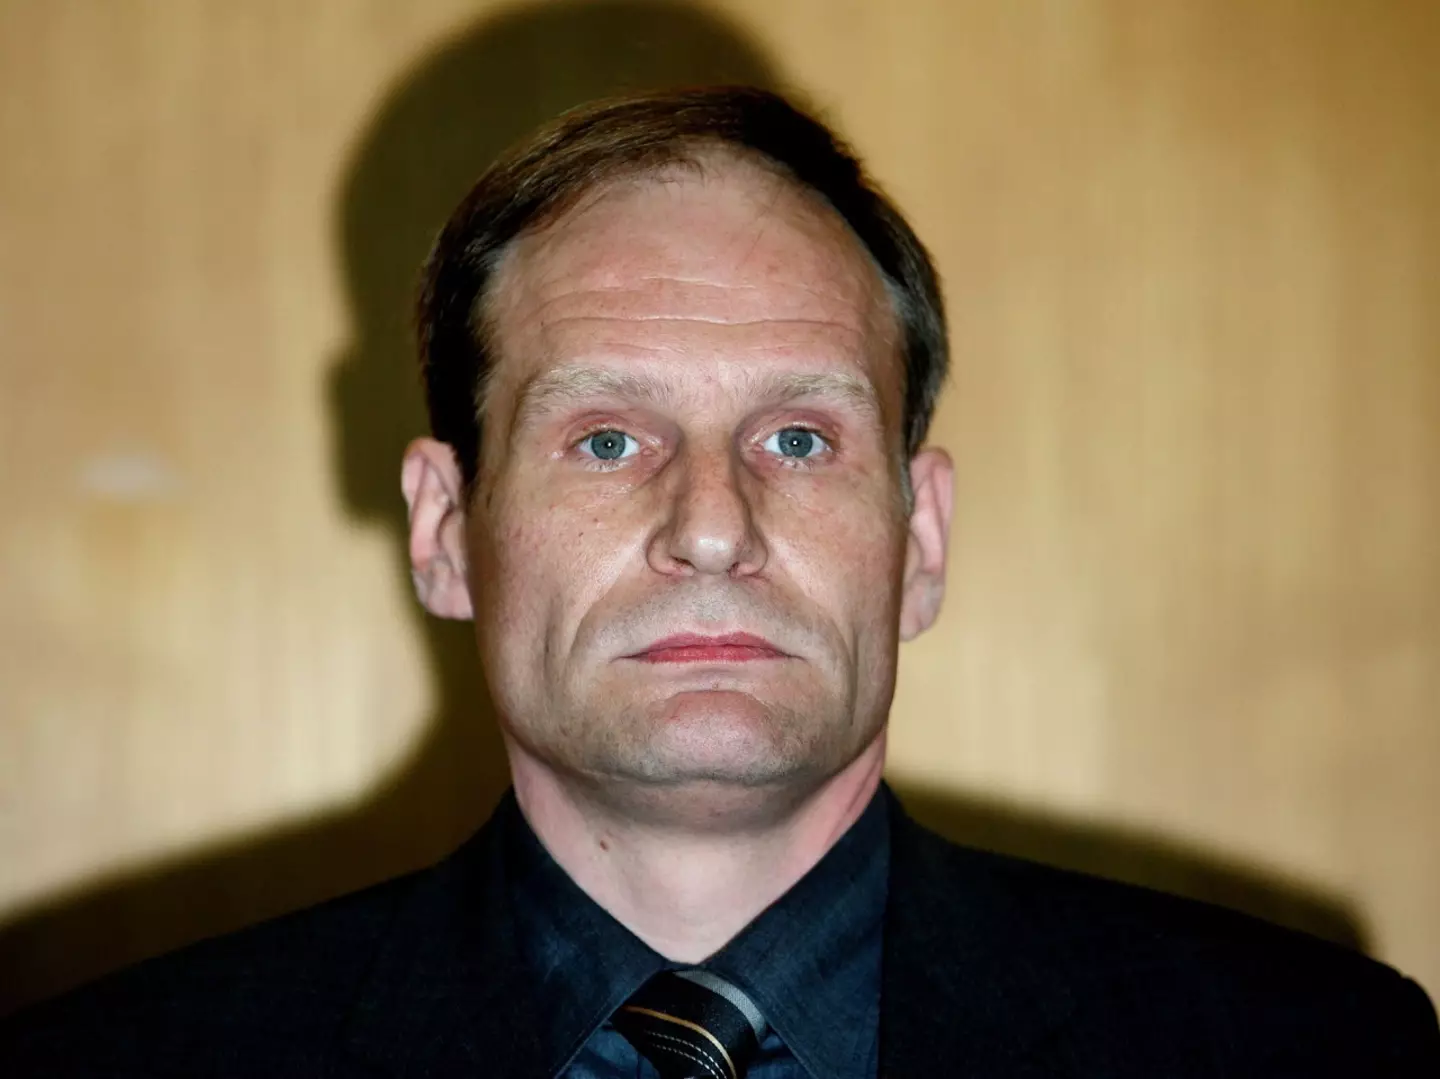 Former computer technician Armin  Meiwes posted an advert looking for a man to be 'slaughtered then consumed'.